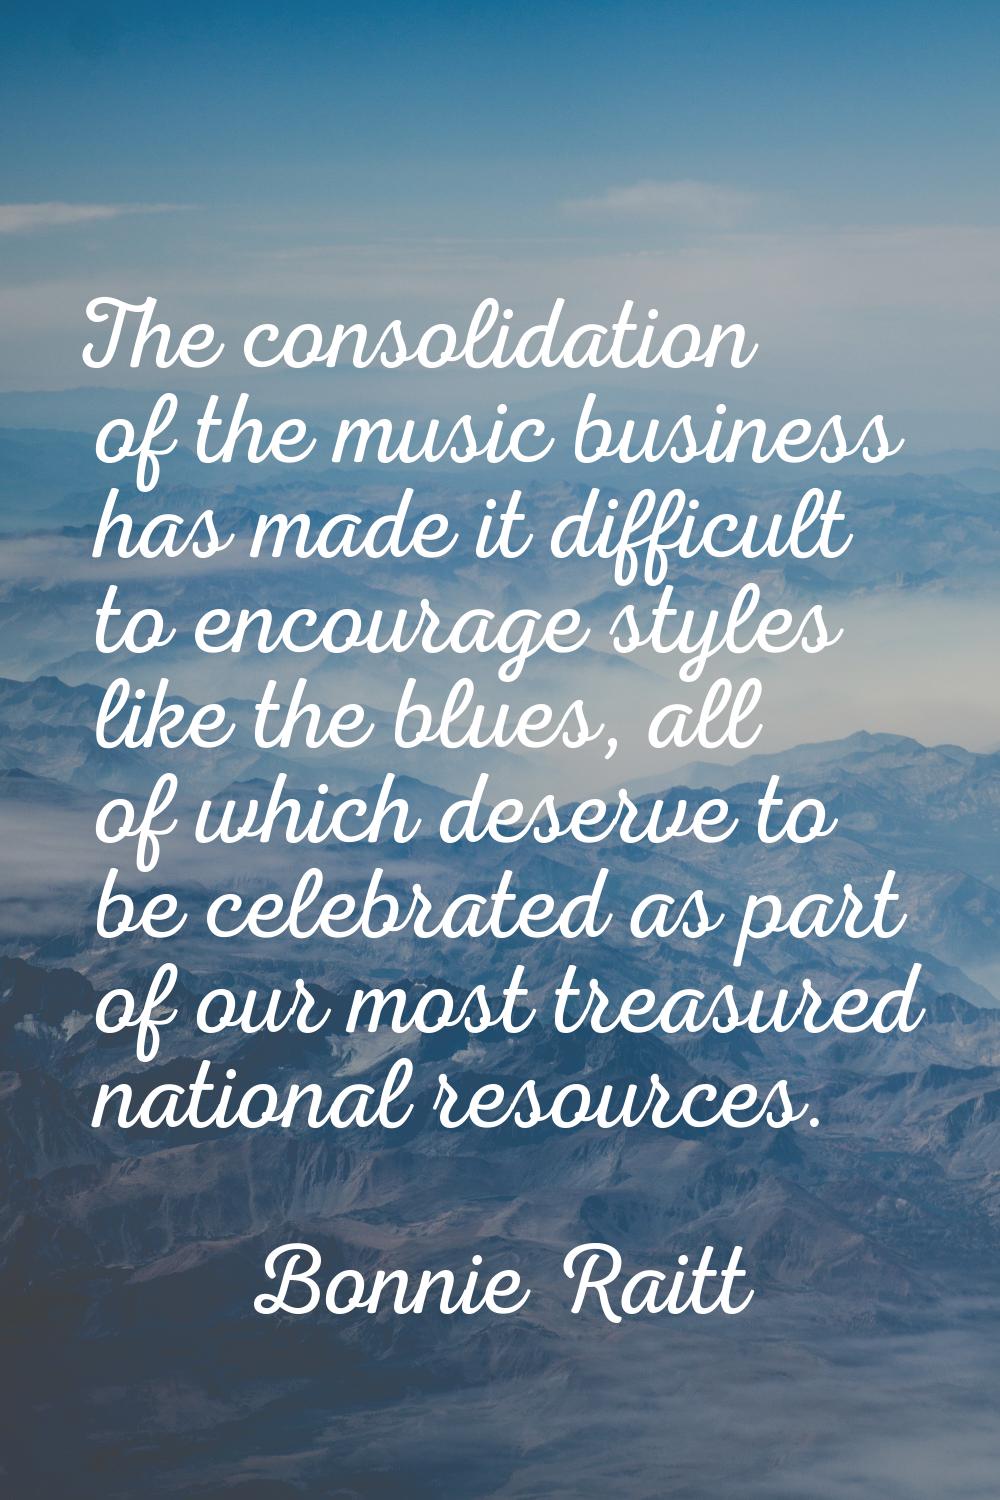 The consolidation of the music business has made it difficult to encourage styles like the blues, a